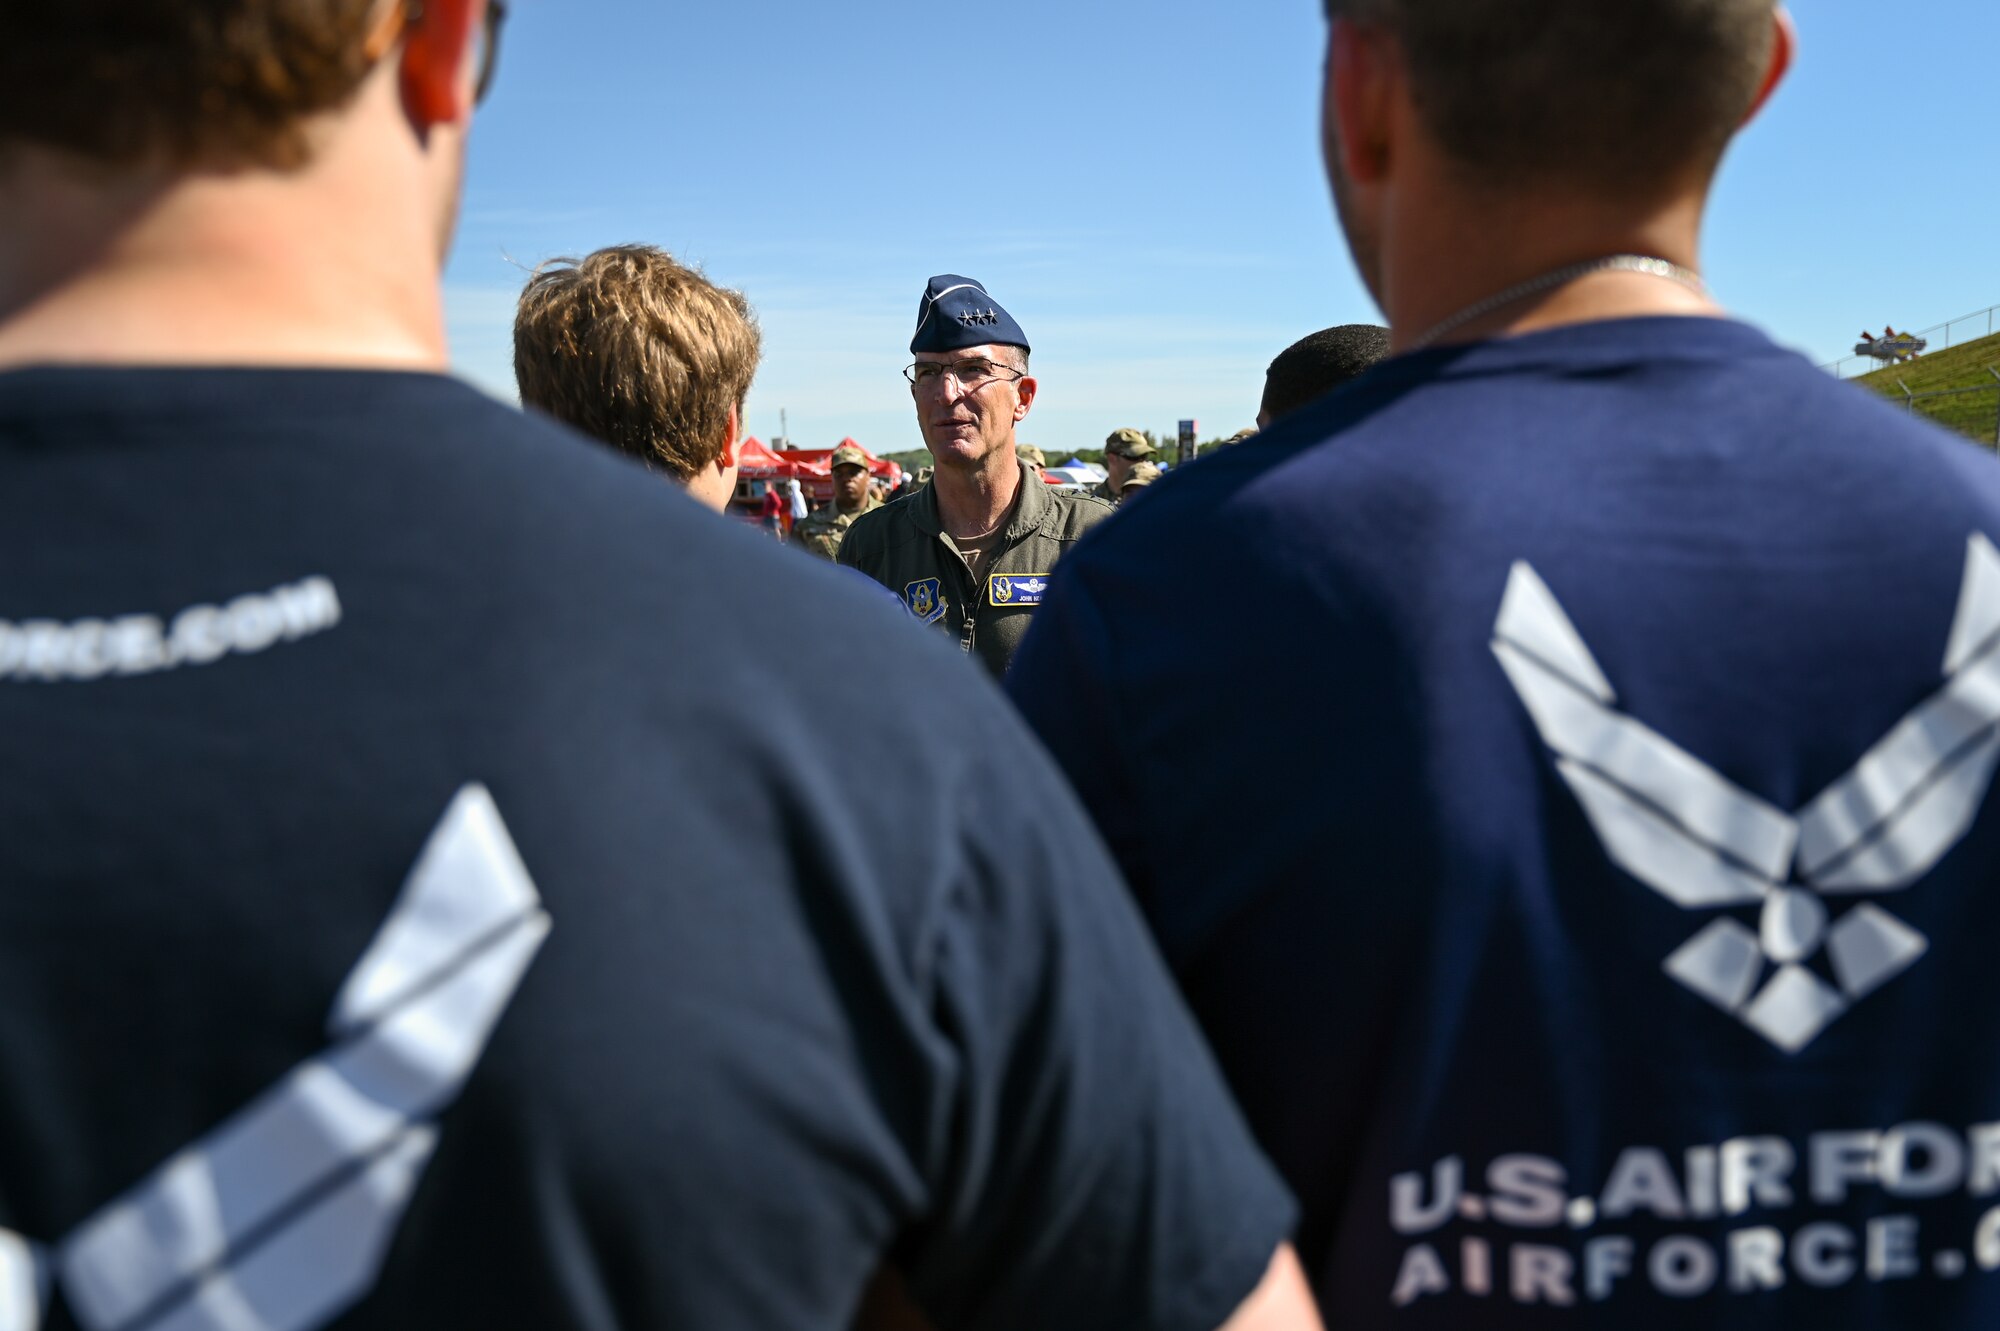 Lt. Gen. John P. Healy, chief of Air Force Reserve and commander, Air Force Reserve Command, engages with members of the delayed entry program.